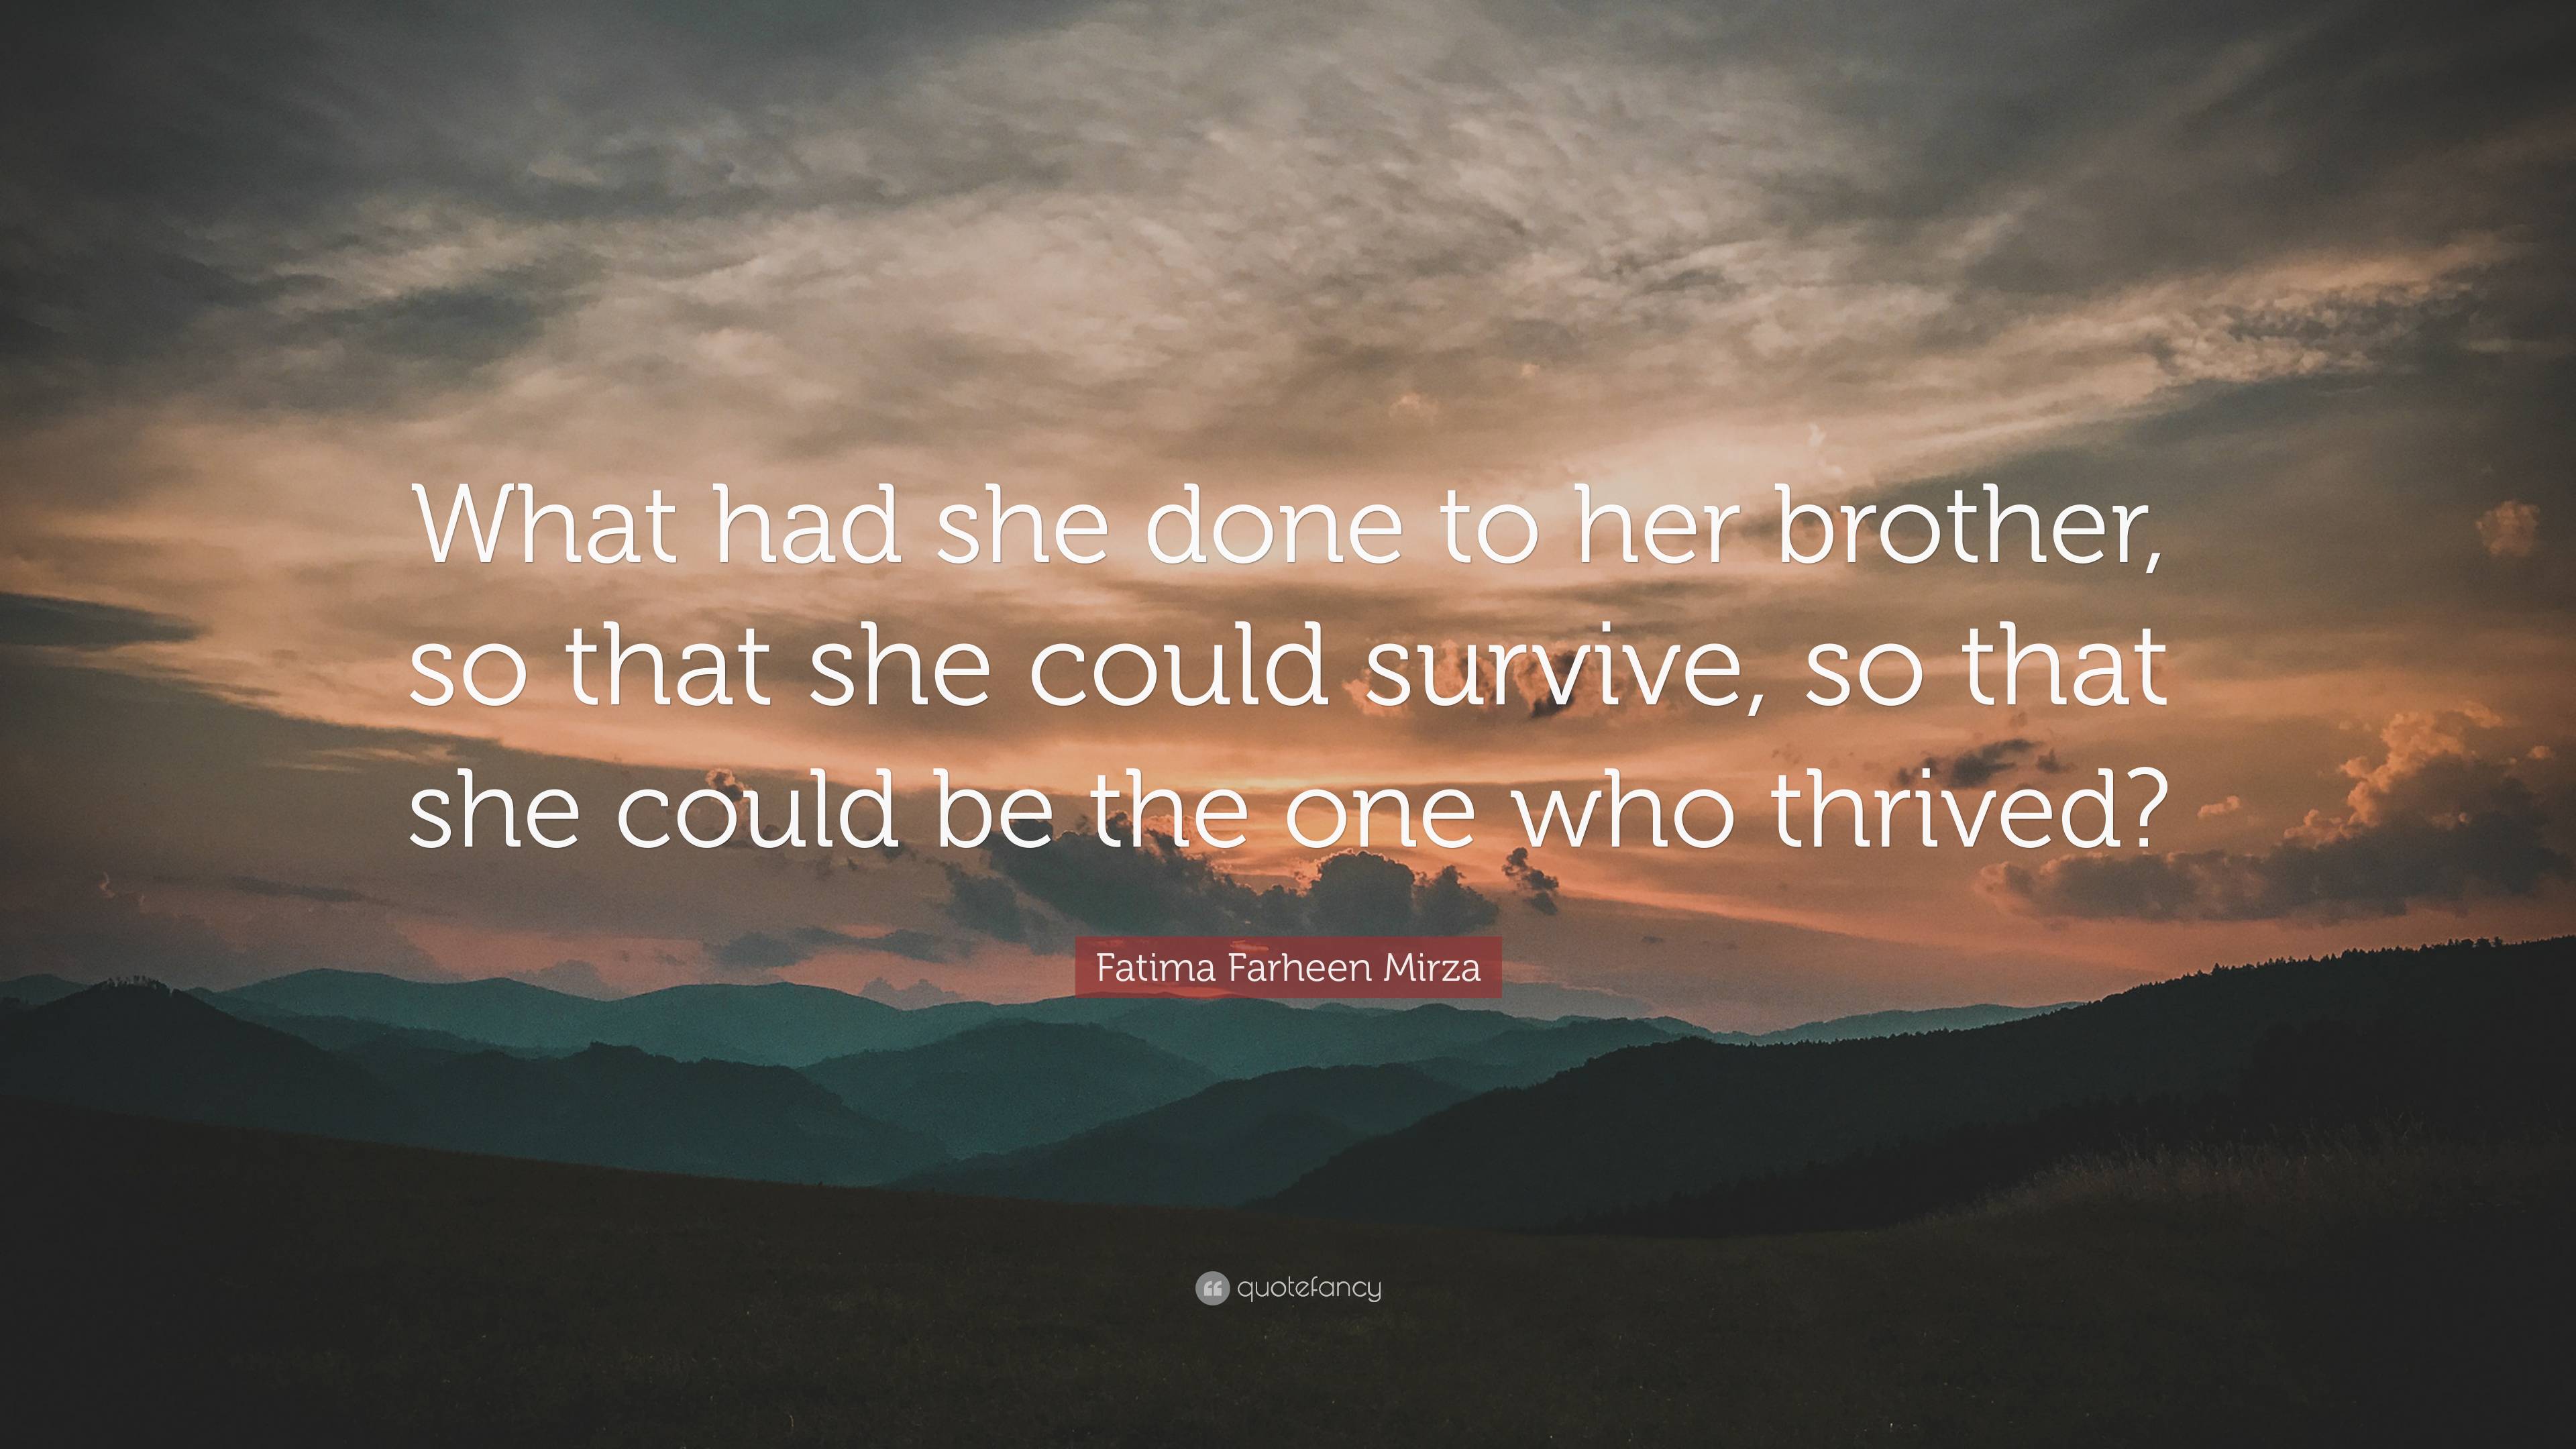 Fatima Farheen Mirza Quote: “What had she done to her brother, so that ...